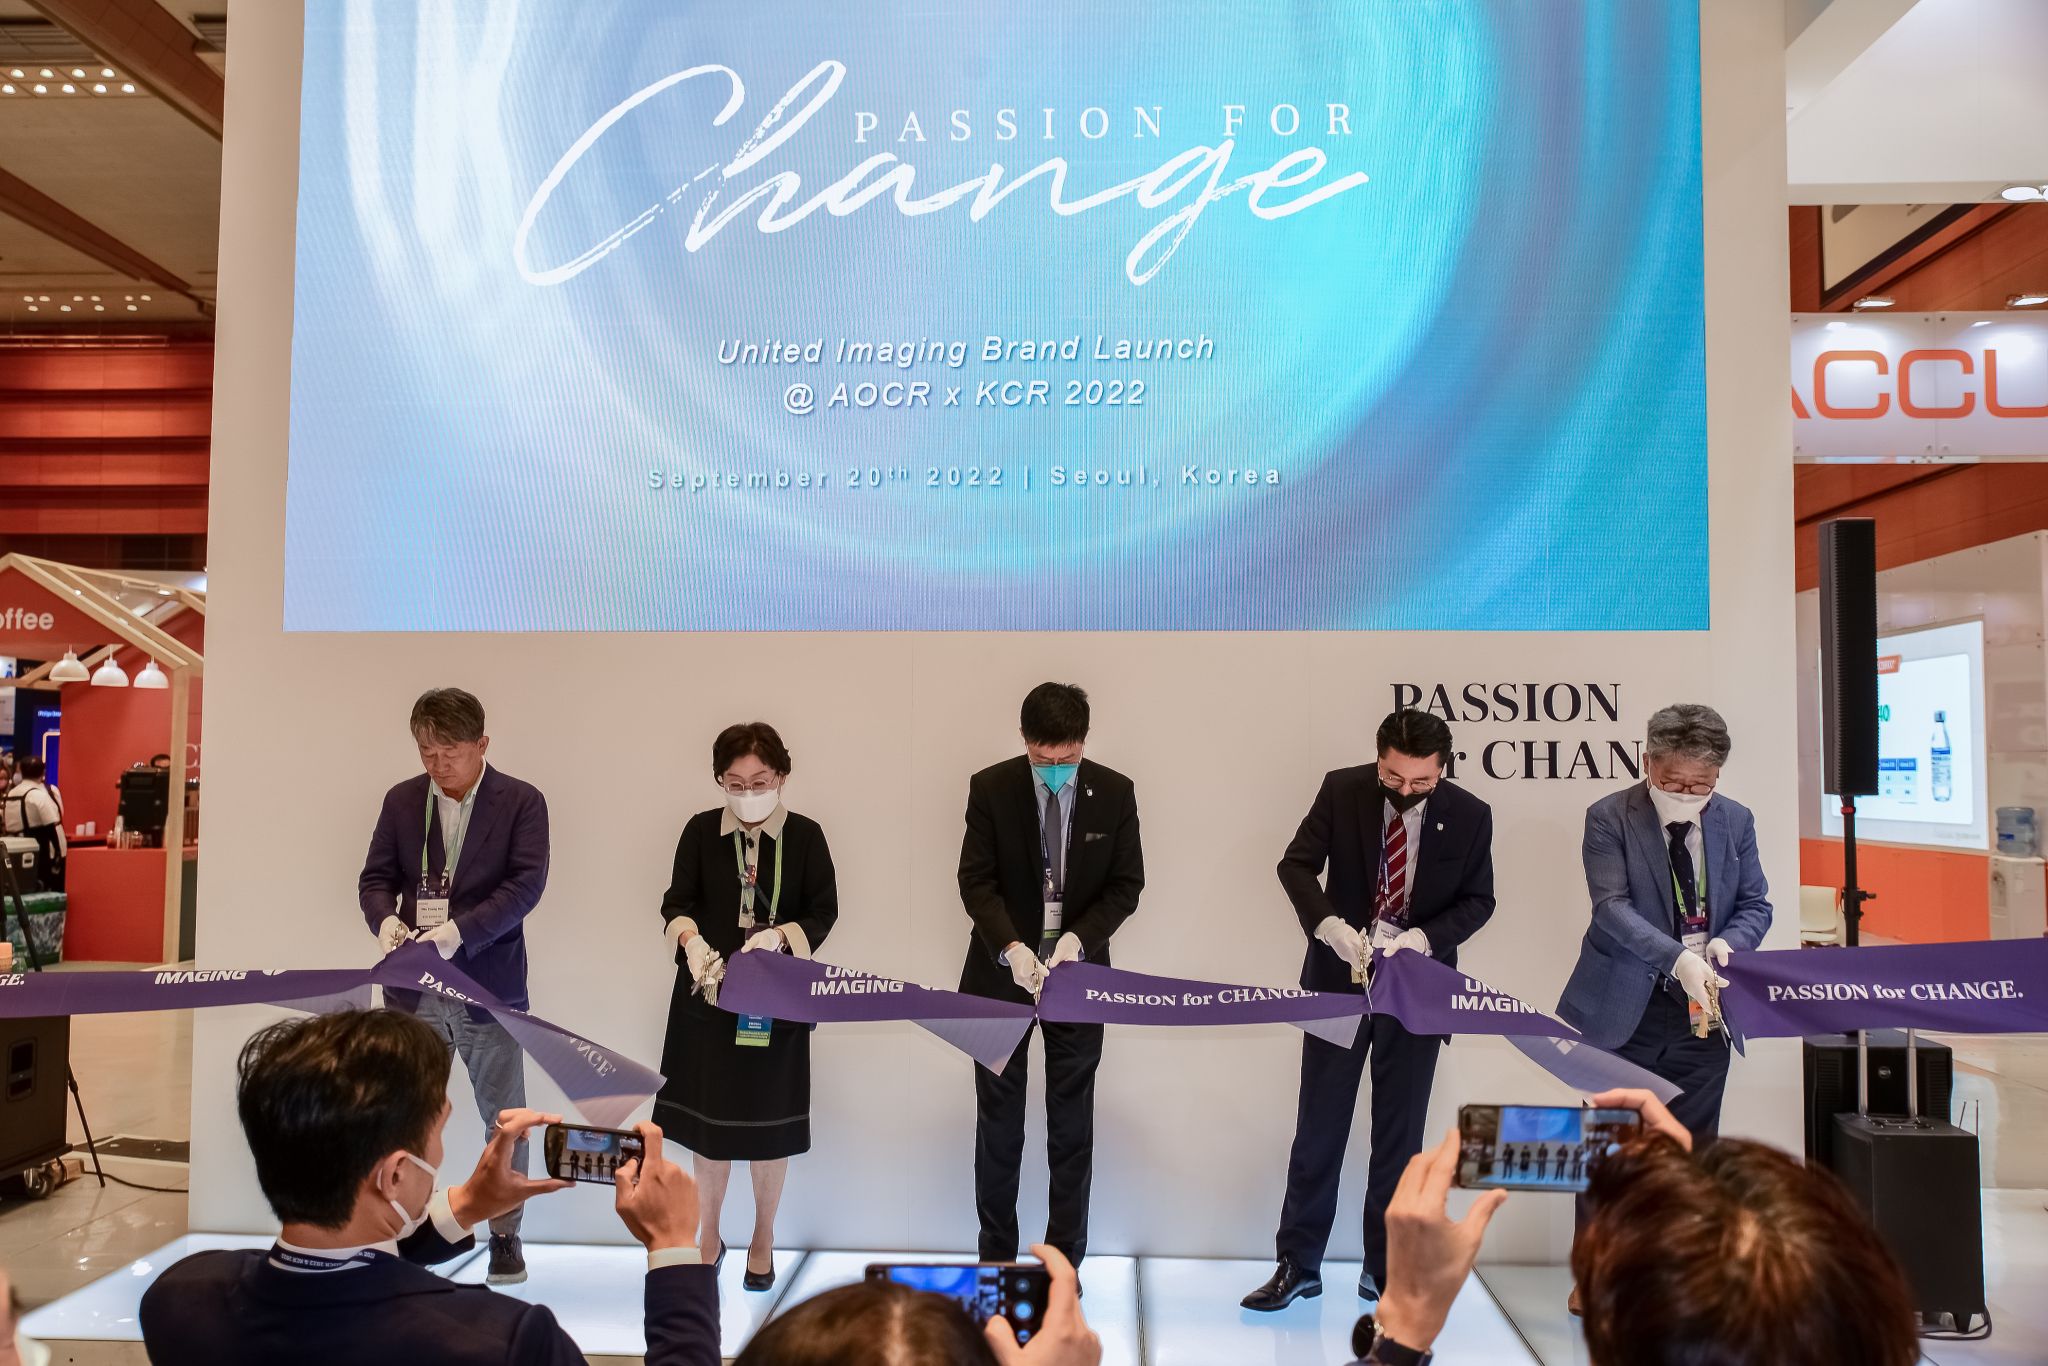 The Ribbon-cutting Ceremony represents the United Imaging Brand Launch at AOCR & KCR 2022 in South Korea.